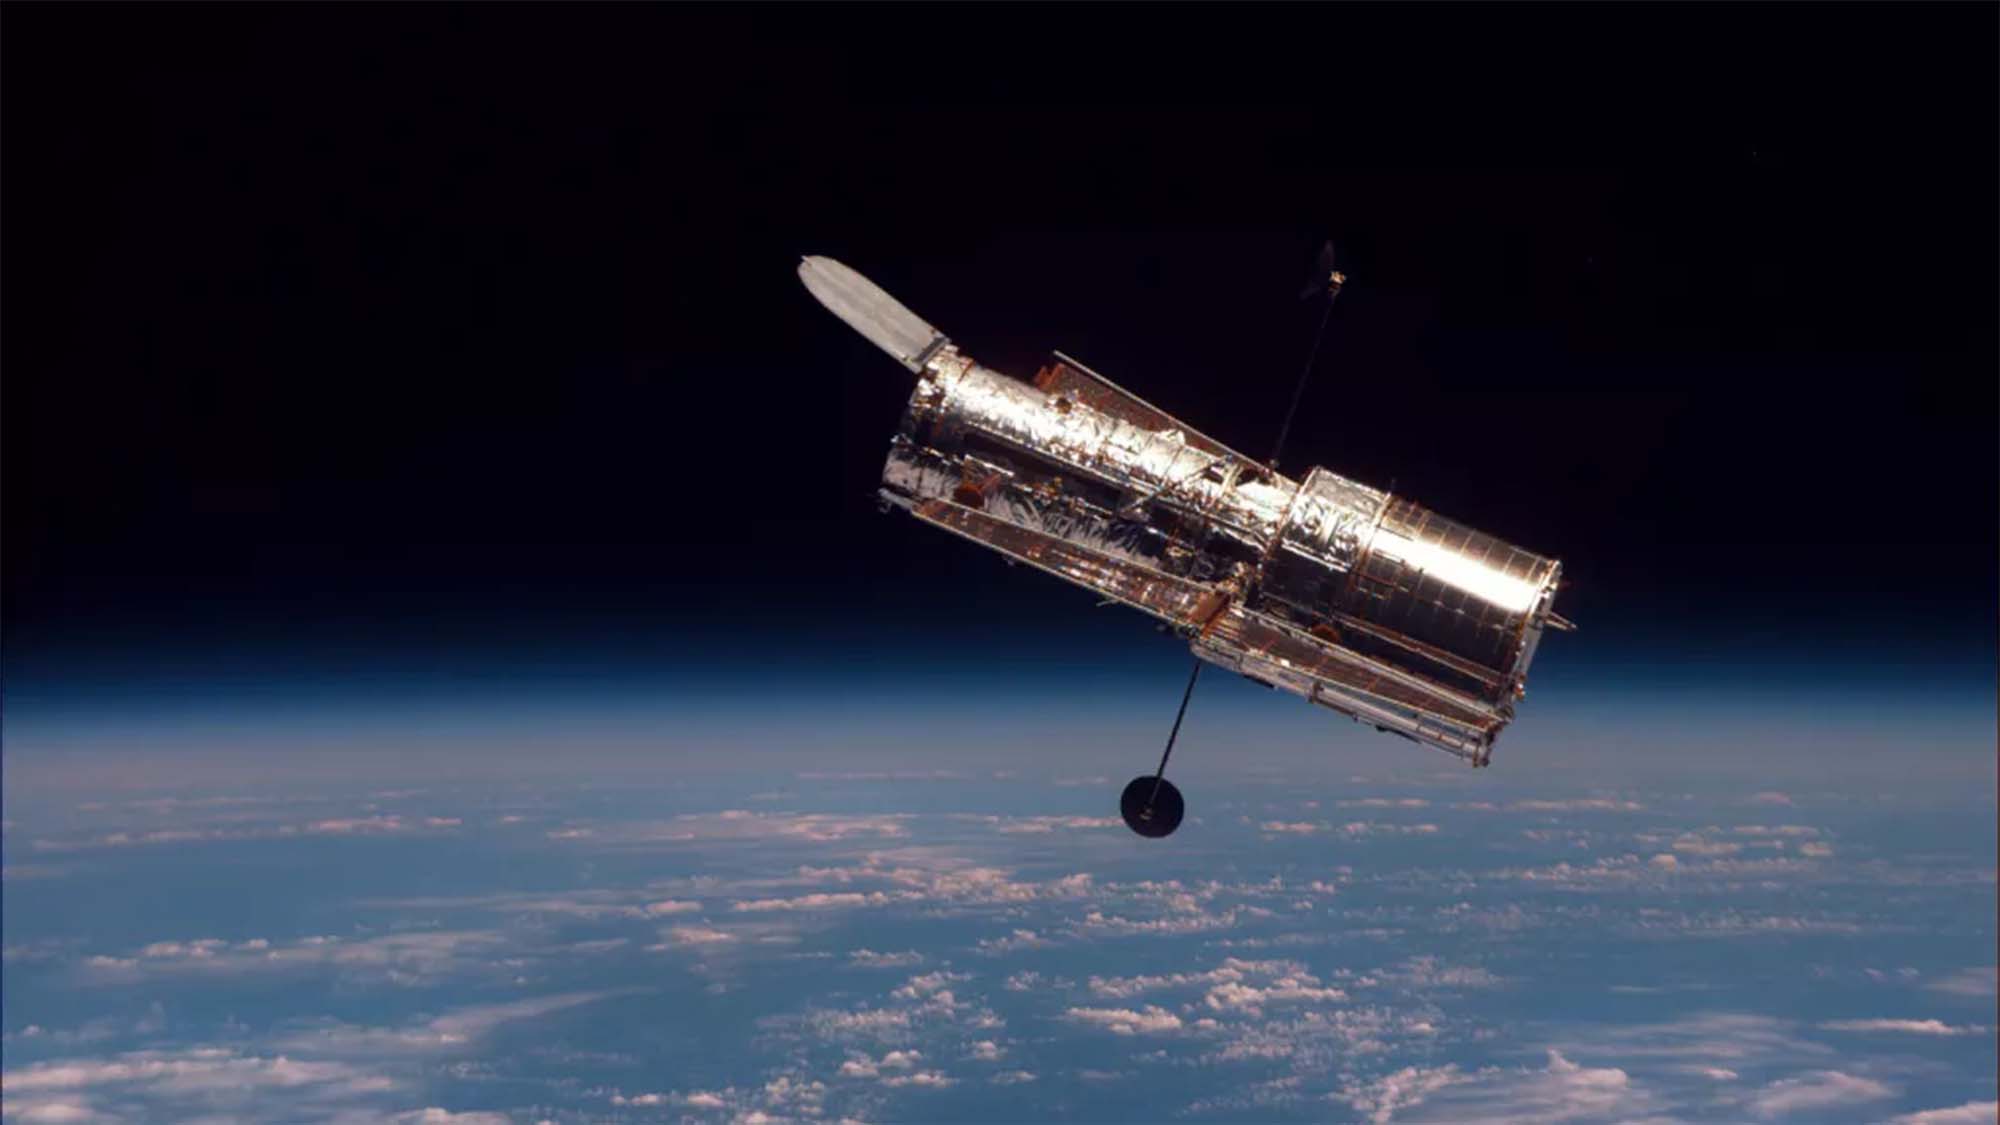 The Hubble Space Telescope as seen from the space shuttle Discovery during the second servicing mission in 1997